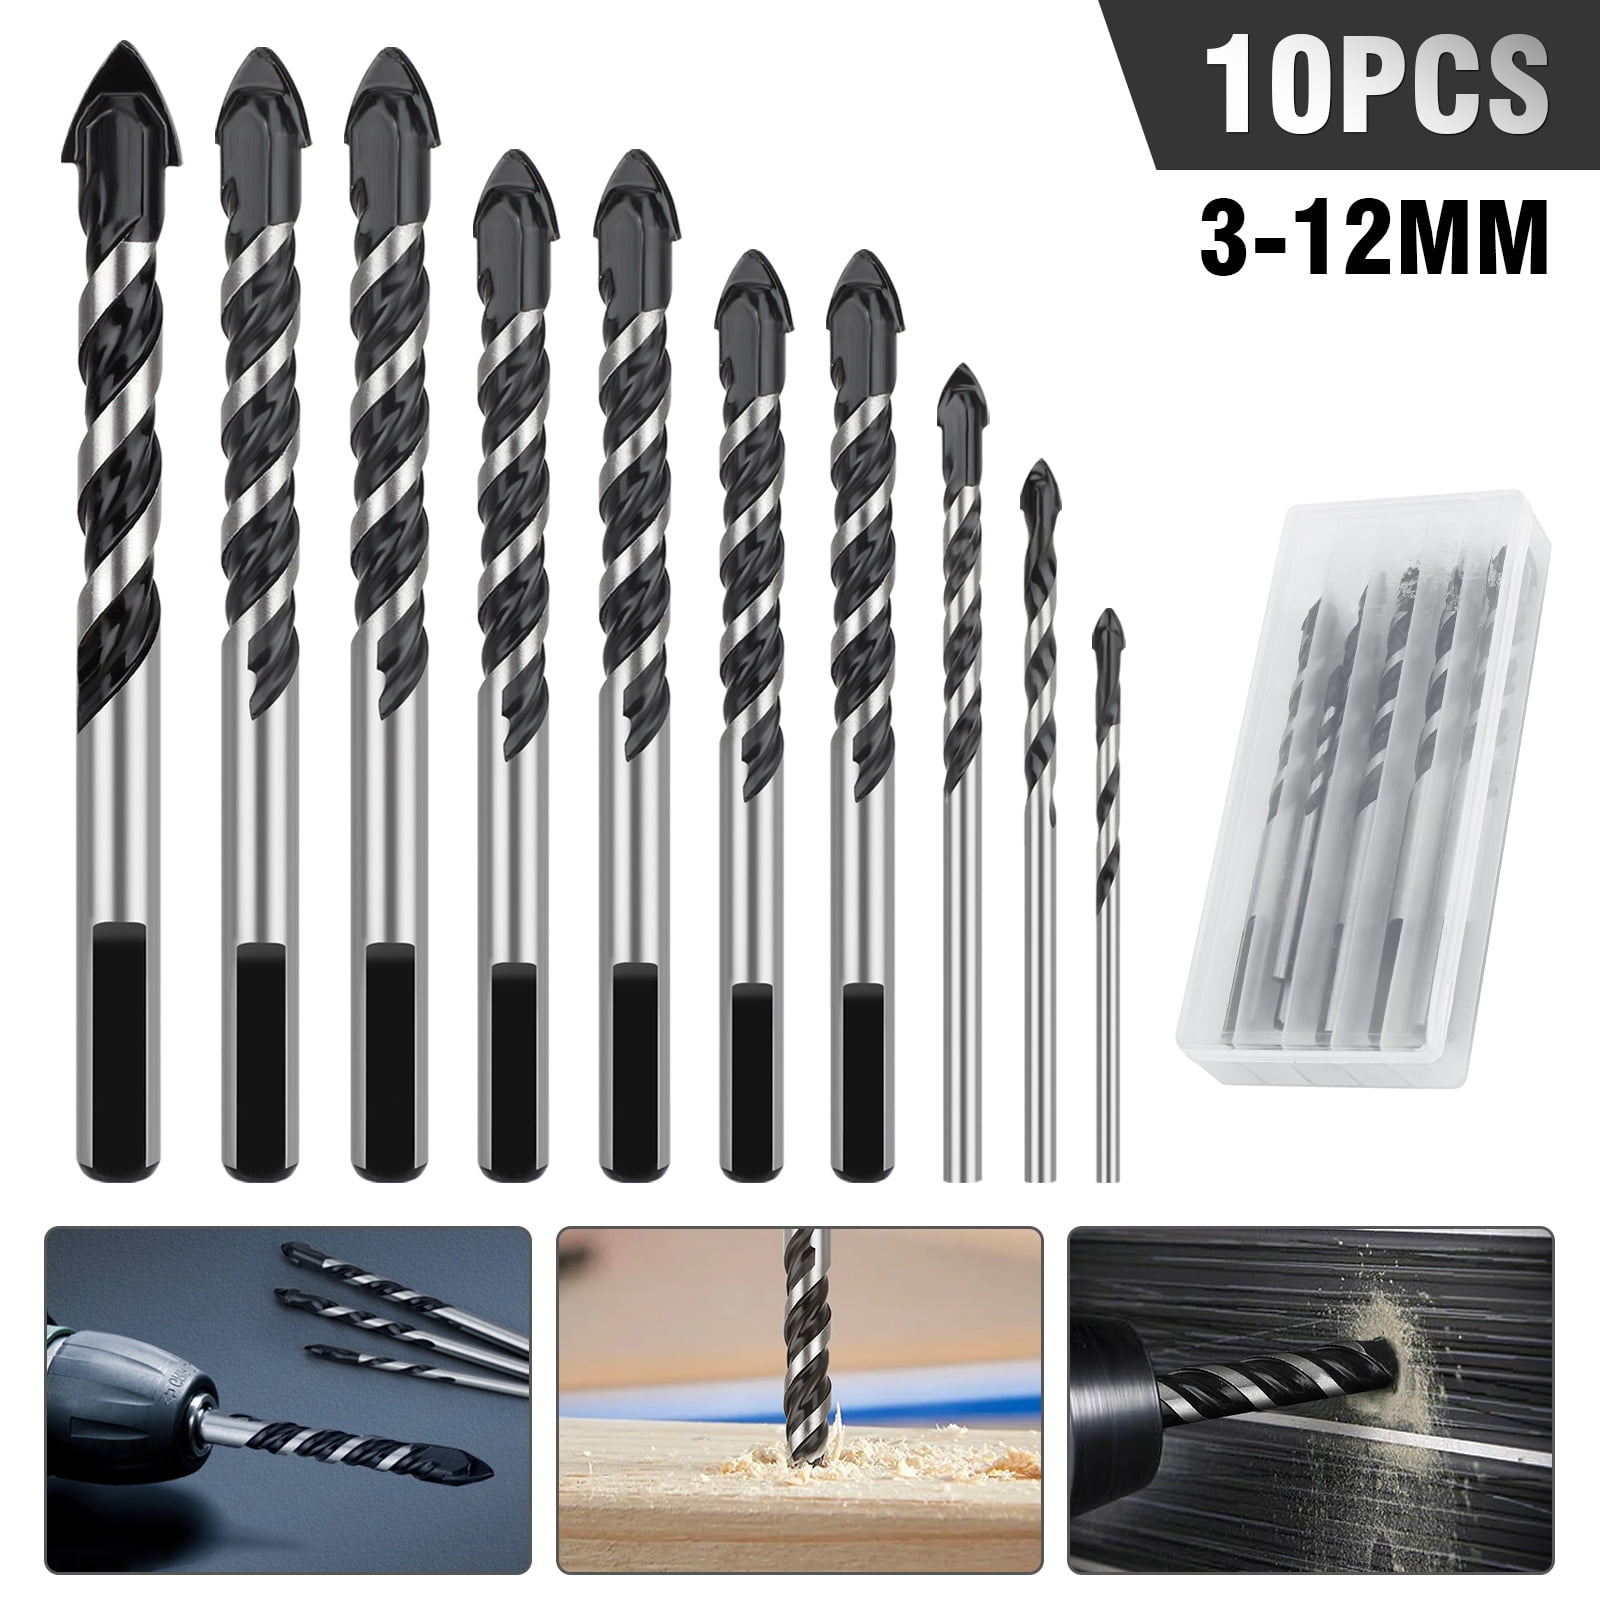 6 6 8 10 12 mm Brick Eaninno Installer Twist Drill Bits for Concrete Tile Ceramic Tile Glass 5 Piece Multi Material Drill Bit Set Carbide Tip Tool for Wall Mirror Wood Brick Wall Plastic 